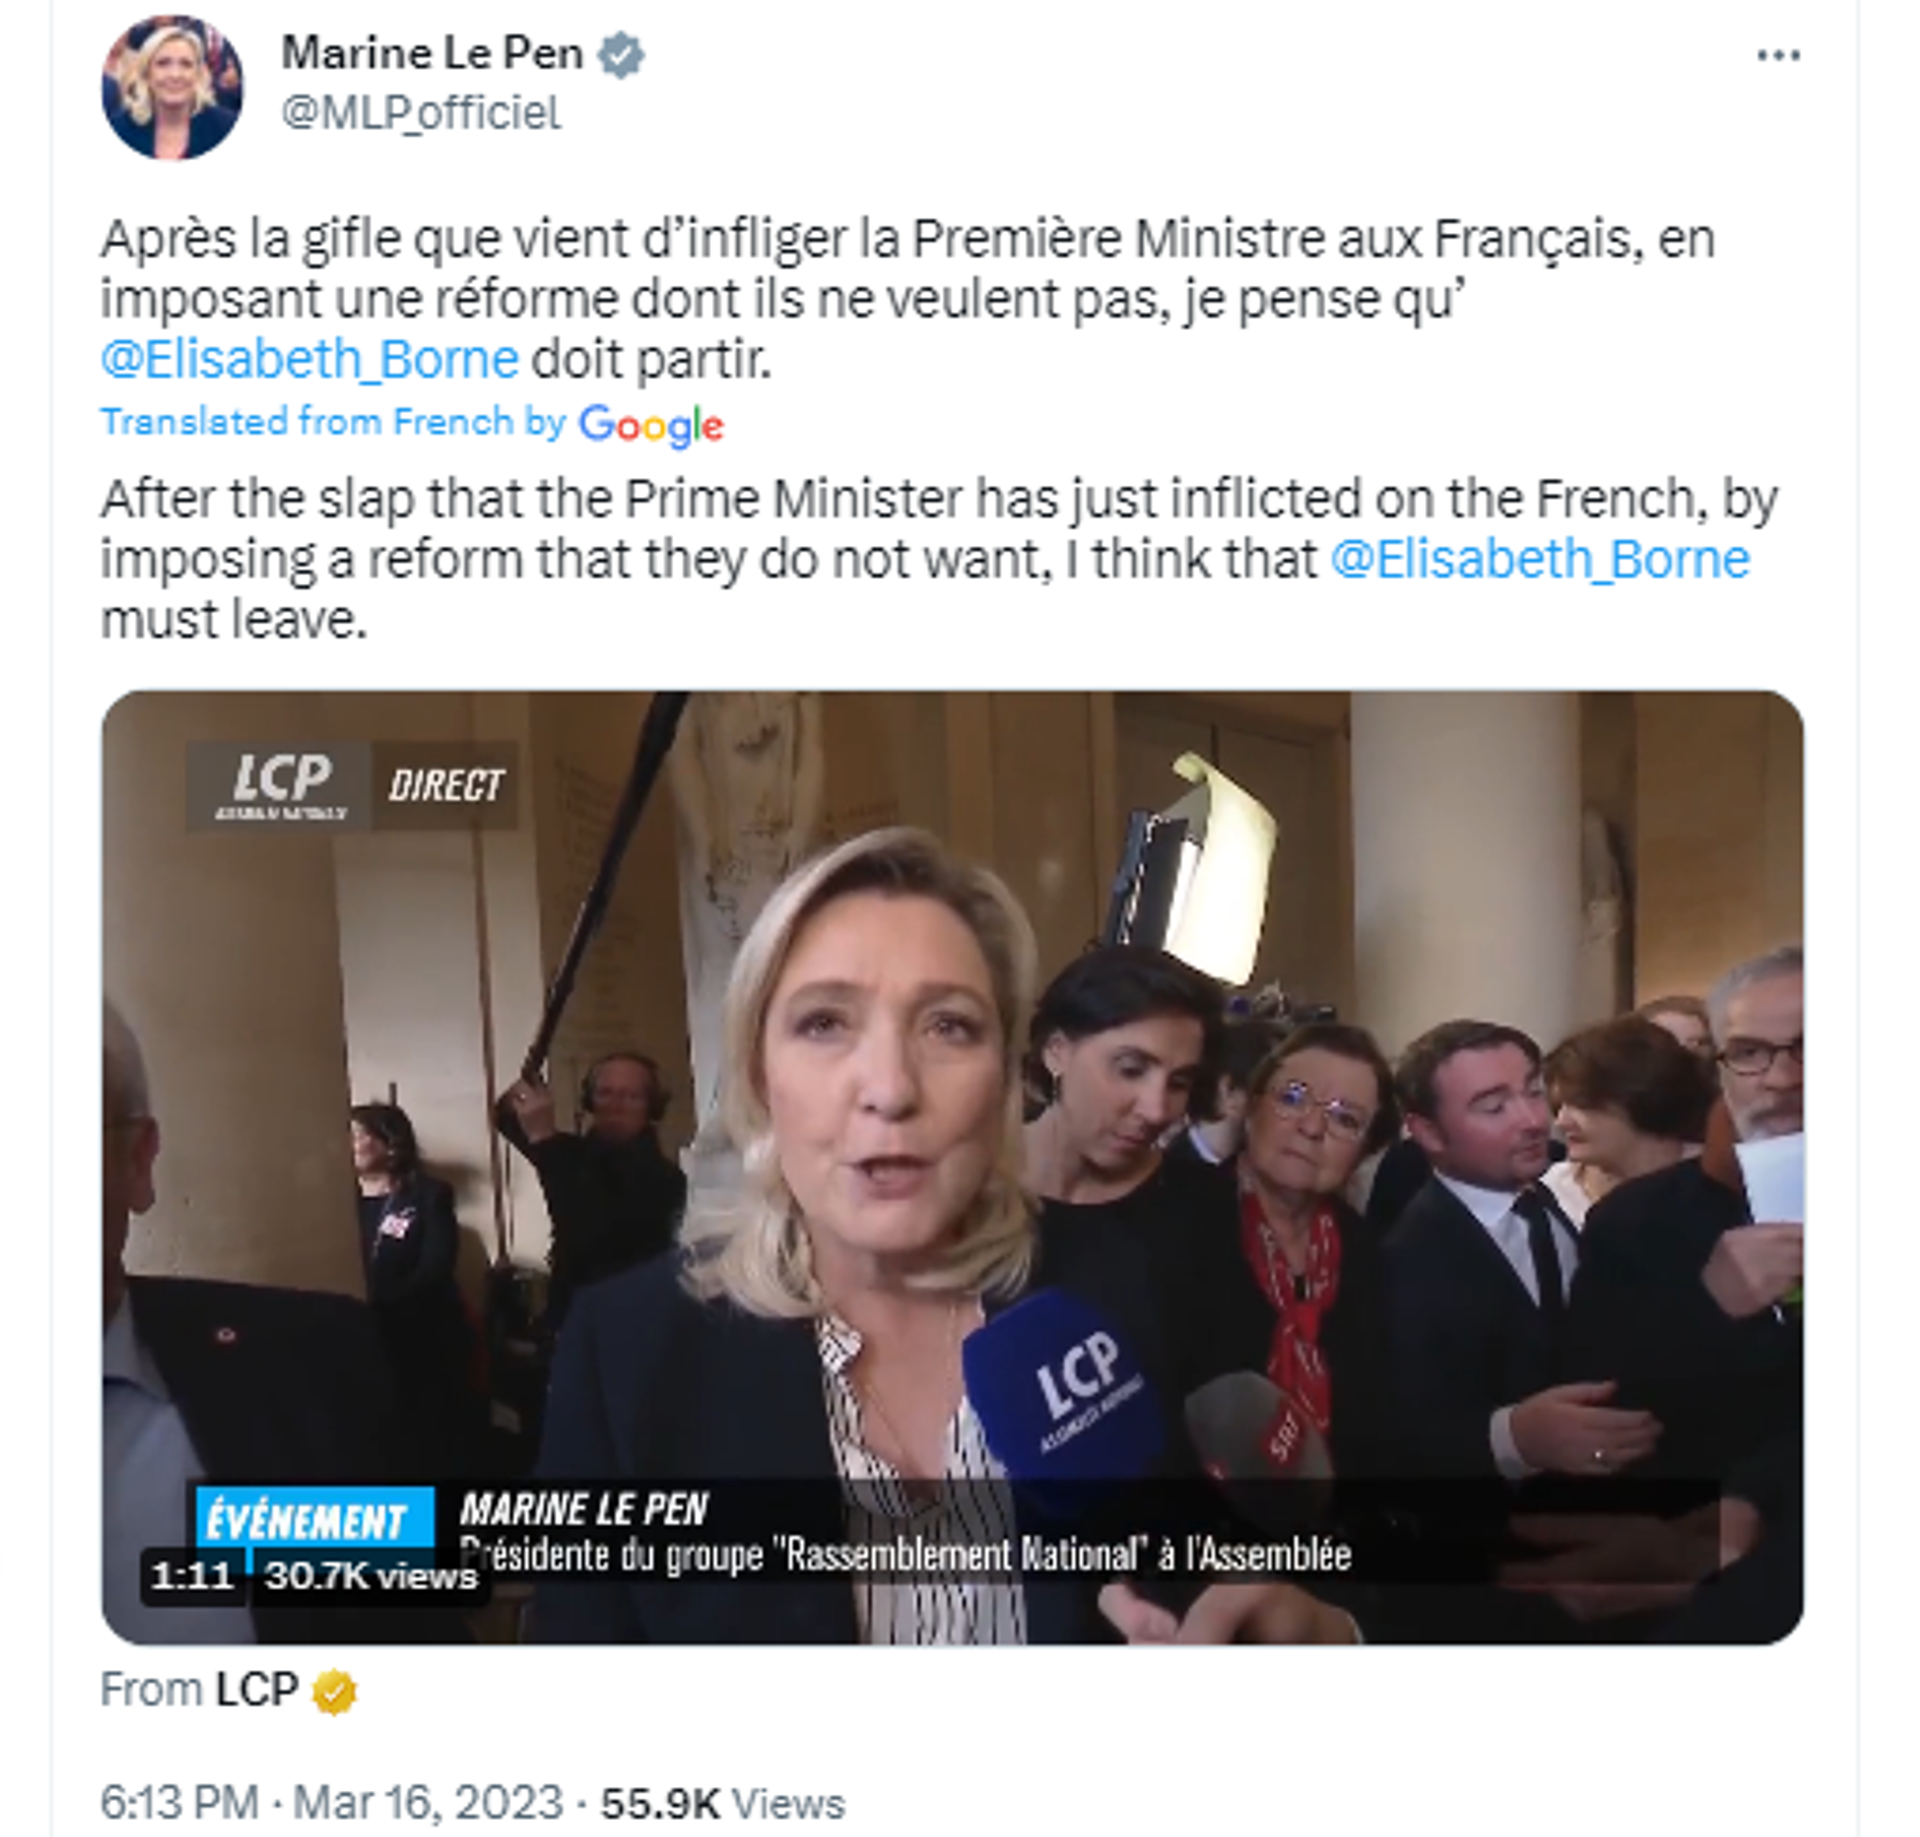 Screenshot of Twitter account of Marine Le Pen, leader of the National Rally party. - Sputnik International, 1920, 17.03.2023